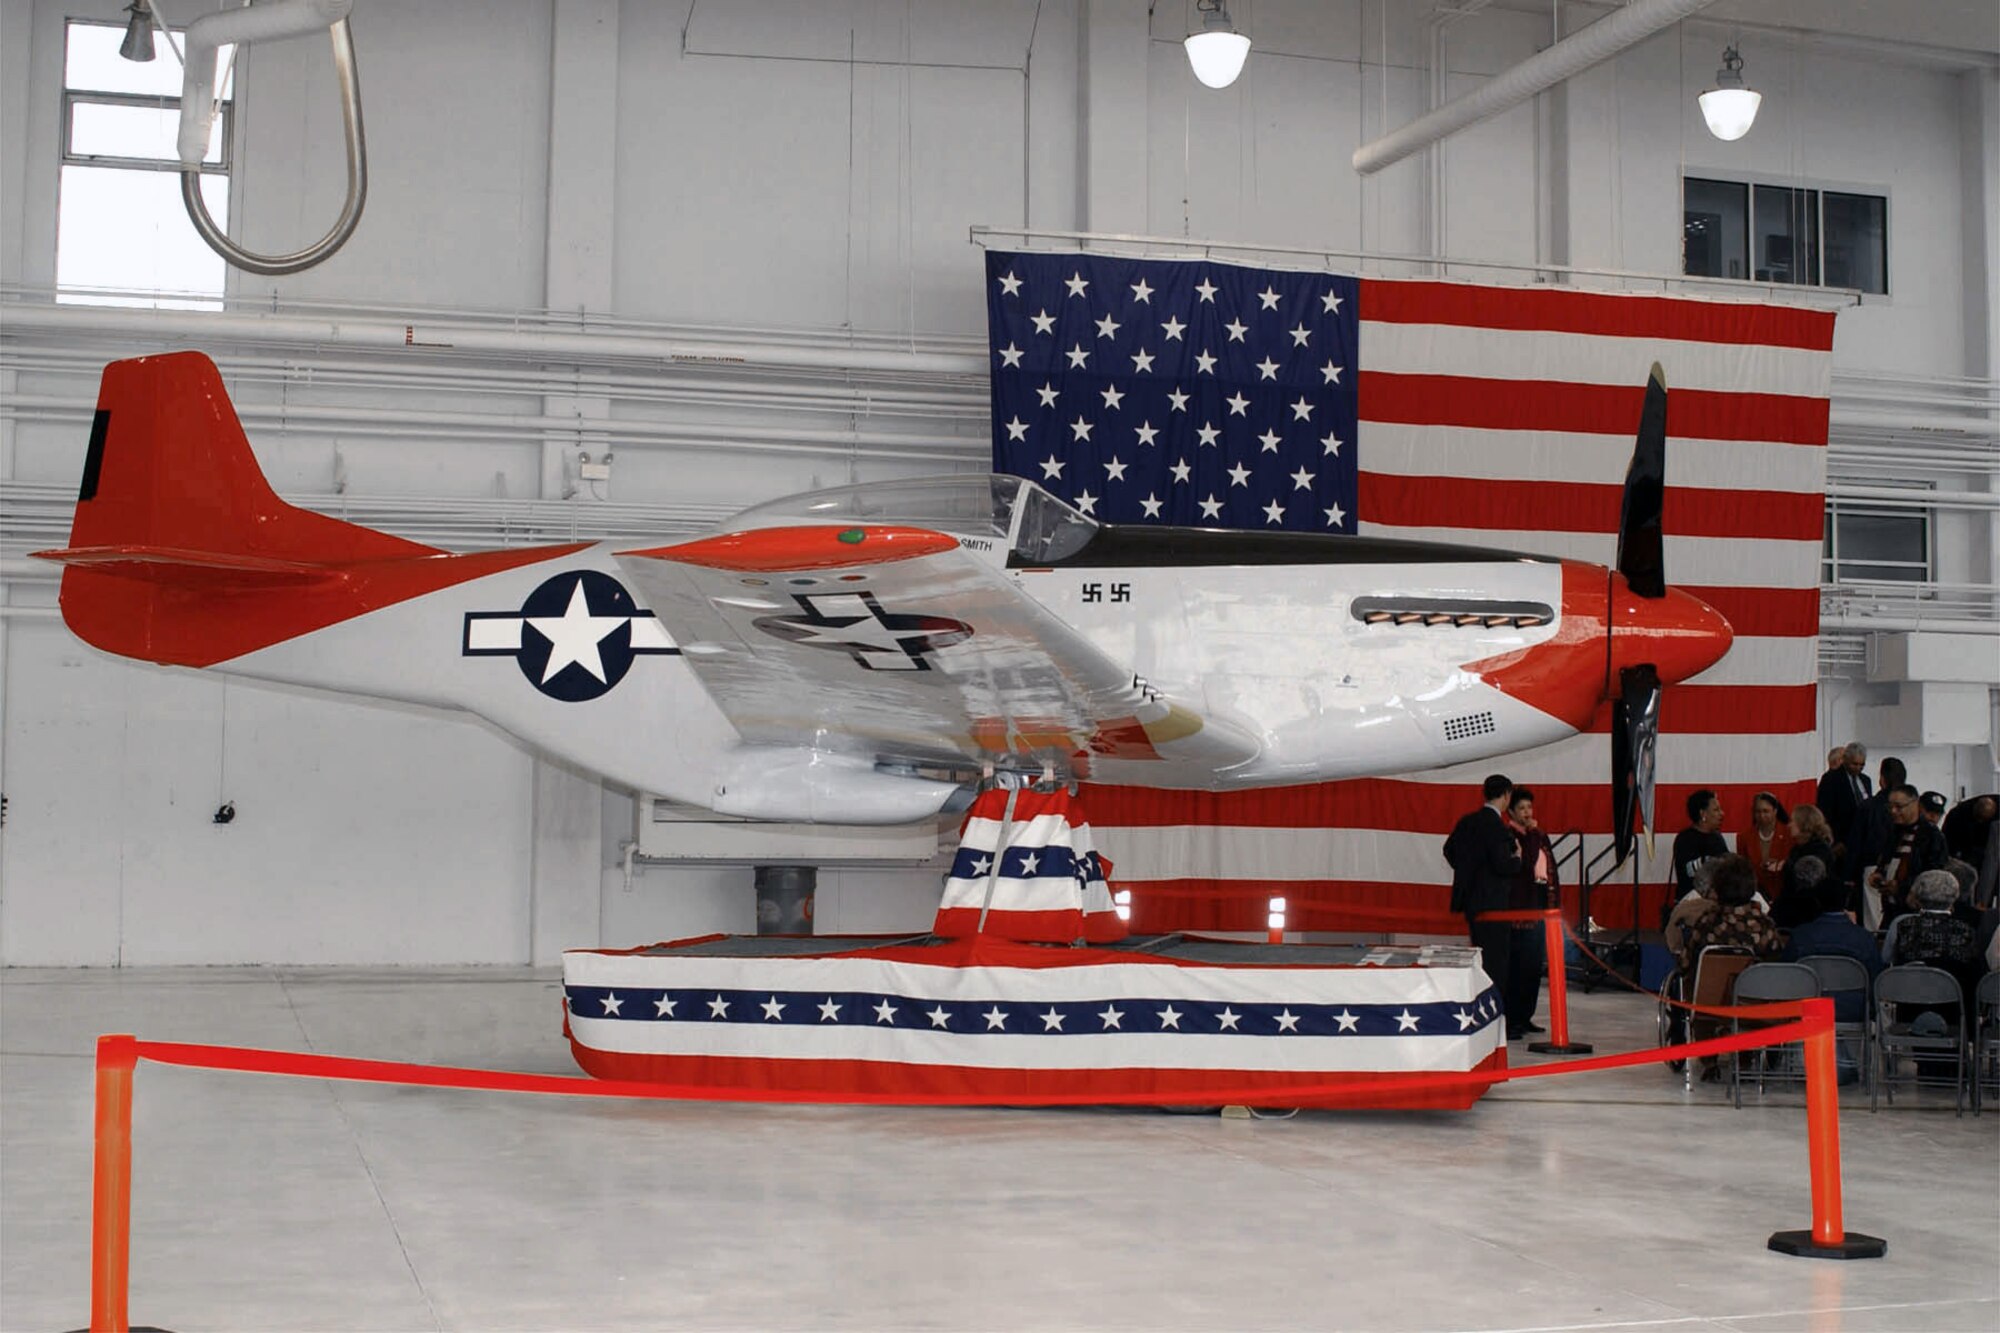 A replica P-51D unveiled during a dedication ceremony held at the 132nd Fighter Wing, Des Moines, Iowa, on November 9, 2002. The P-51D classically painted as a "Red Tail Angel", identified to all that the aircraft was being flown by the famed Tuskegee Airman of the 332nd Fighter Group. The P-51D will be on static display at the new main entrance of the 132nd Fighter Wing as the Iowa Tuskegee Airmen Memorial.  The Mustang bears the names and numbers of two of Iowa's most famous flyers, number 93, flown by Capt. Robert Williams (Williams wrote the original manuscript for the 1995 HBO film "The Tuskegee Airmen") and number 10, flown by Capt. Luther Smith (Smith survived being shot down and held captive by the Germans with life threatening wounds). (U.S. Air Force photo/Senior Master Sgt. Tim Day)(released) 